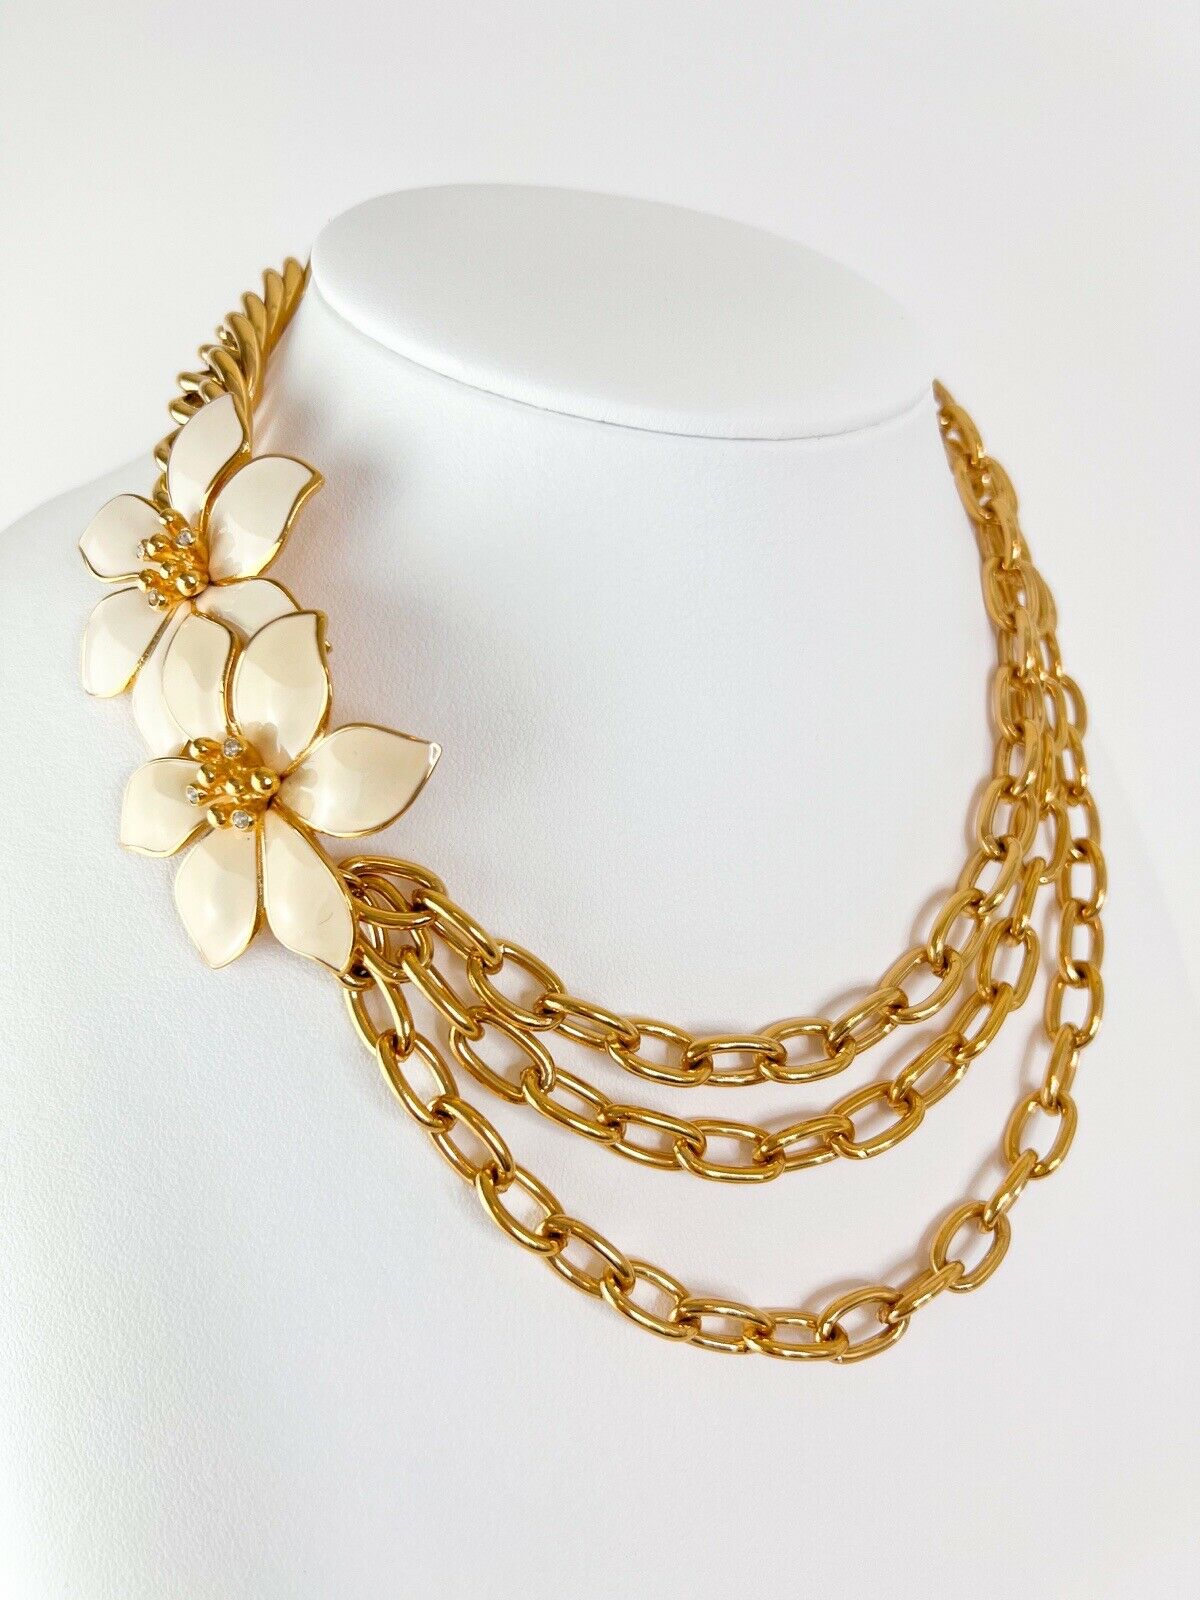 Givenchy Charm Necklace Gold Floral Chain